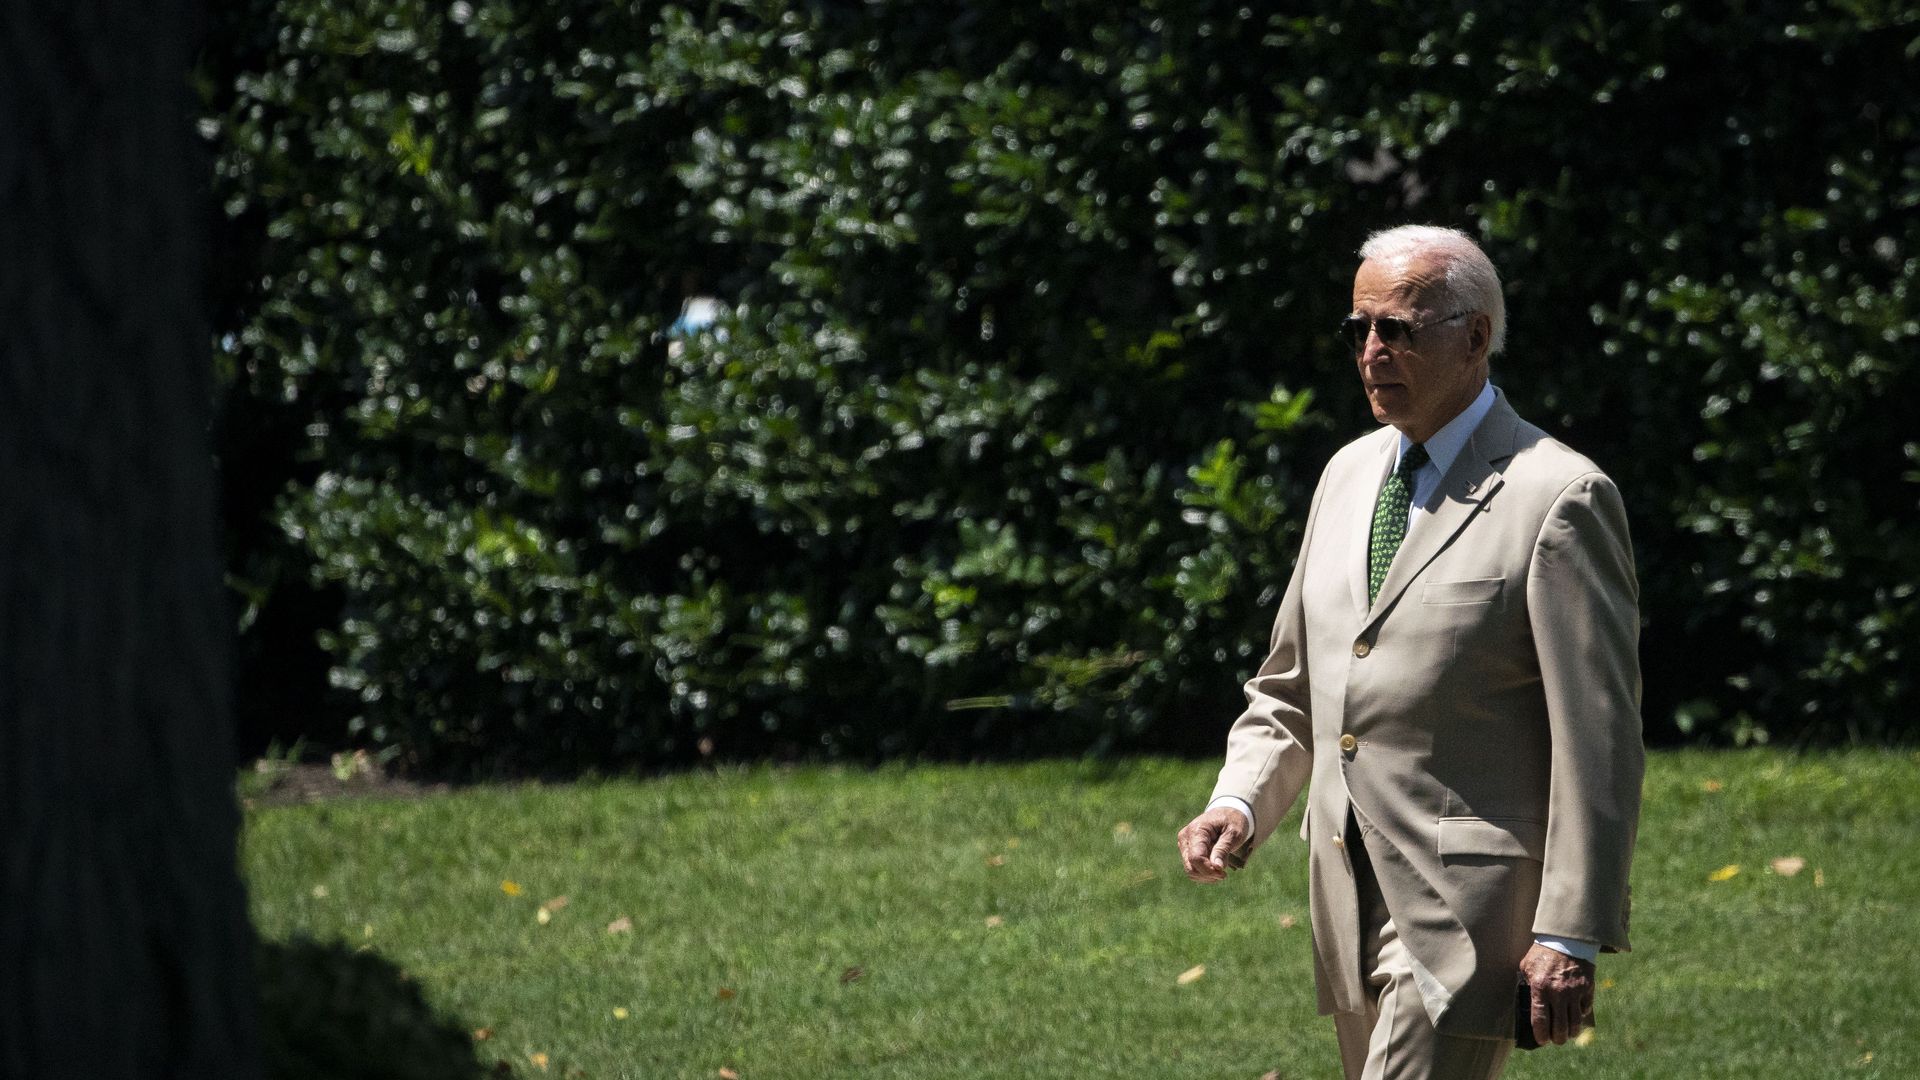 Photo of Joe Biden in a tan suit and sunglasses walking on grass